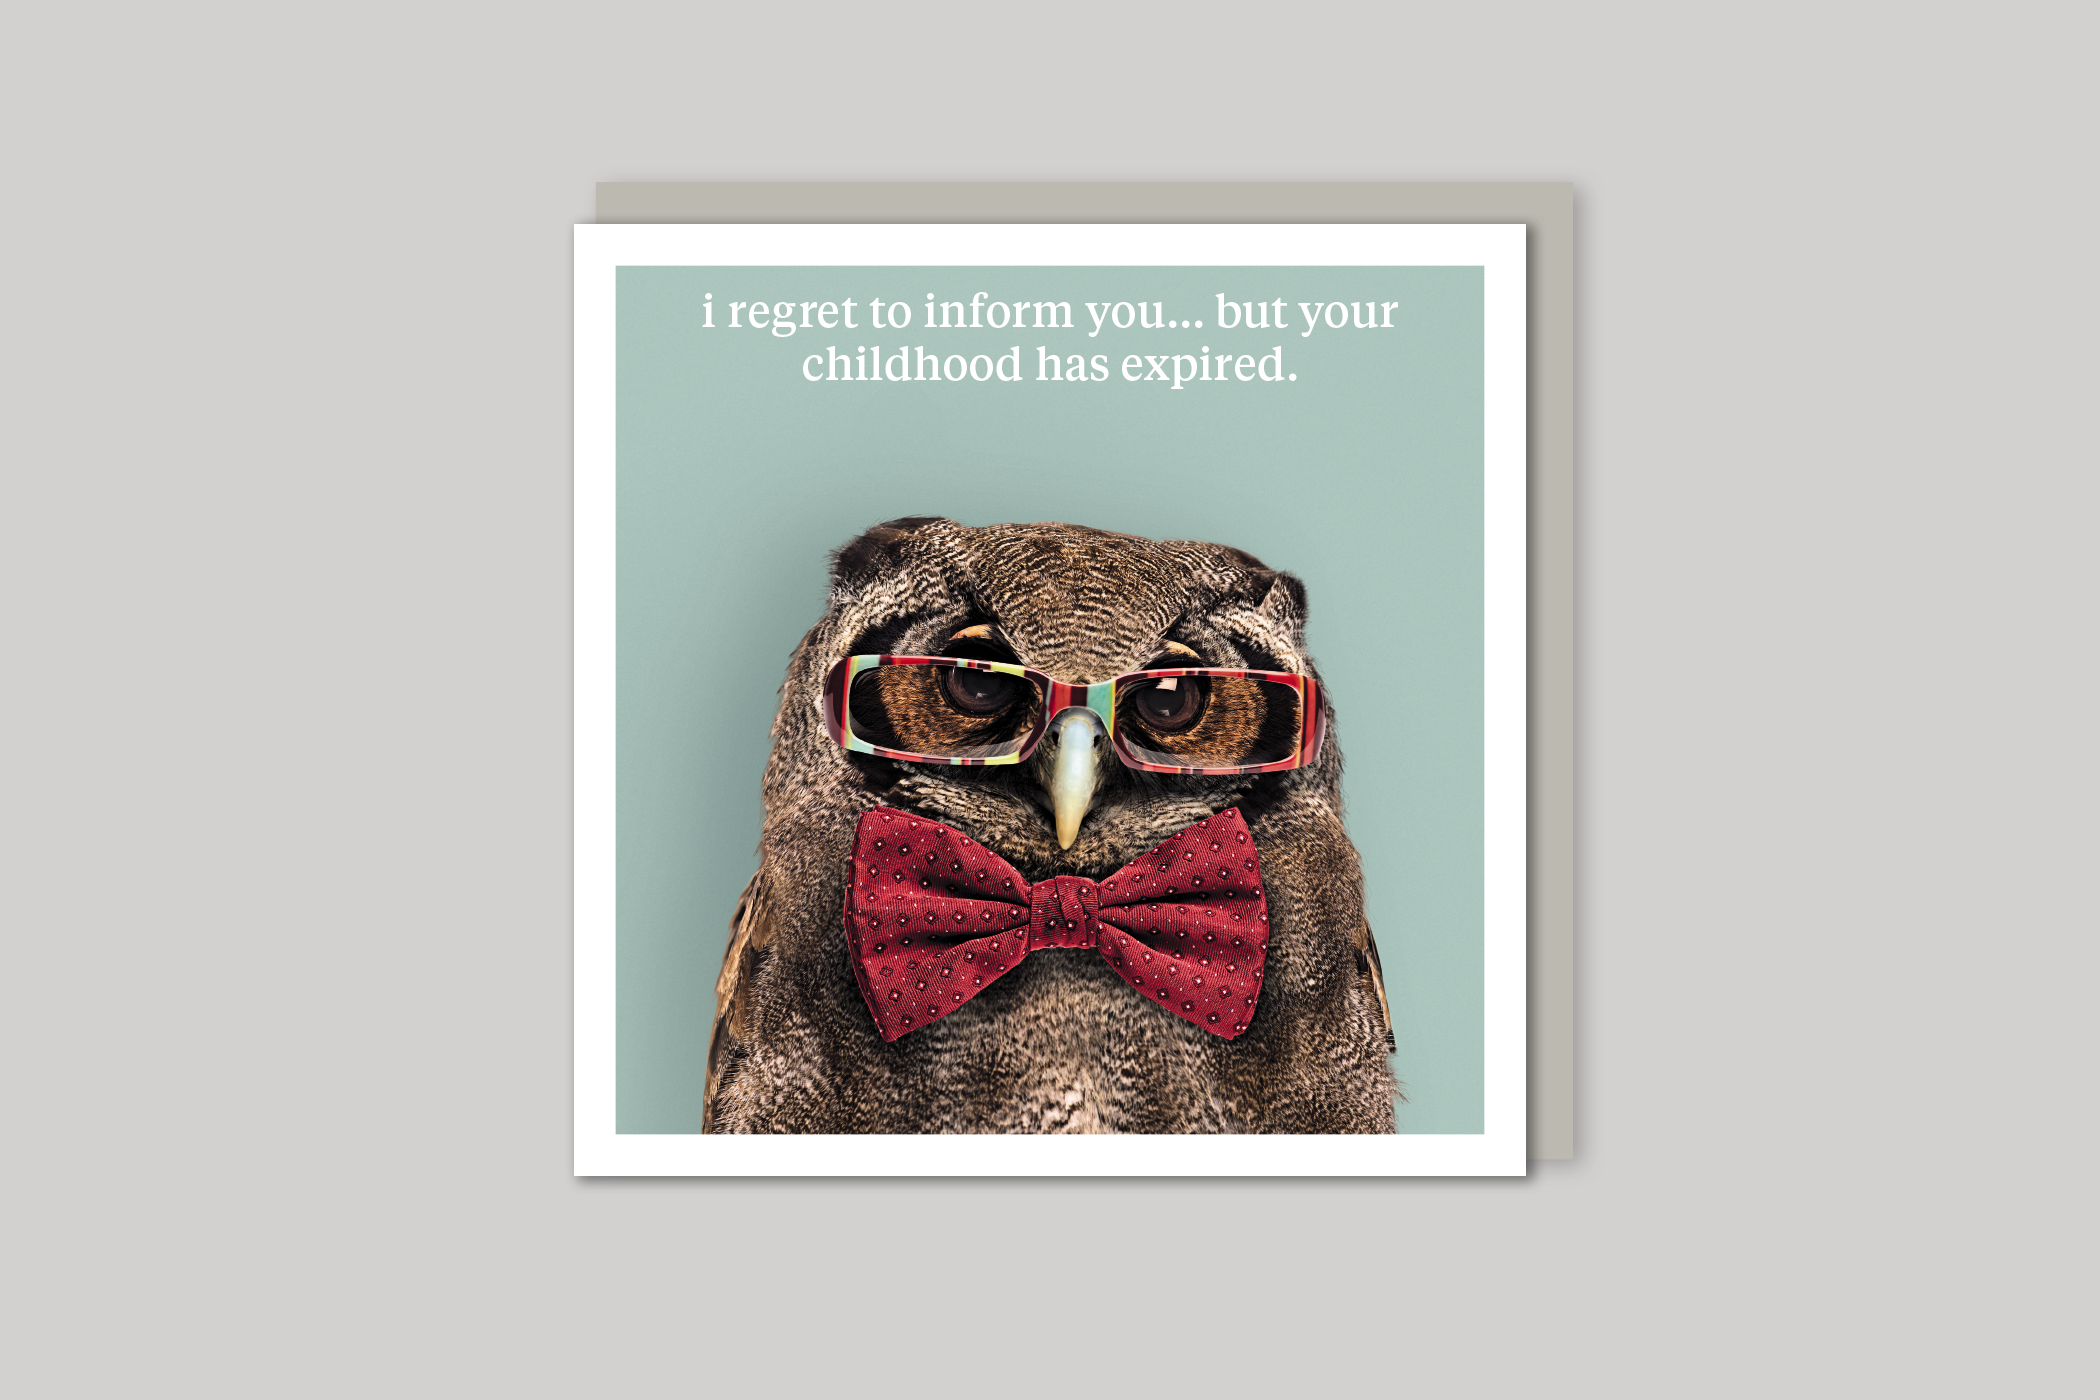 Your Childhood Expired quirky animal portrait from Curious World range of greeting cards by Icon, back page.